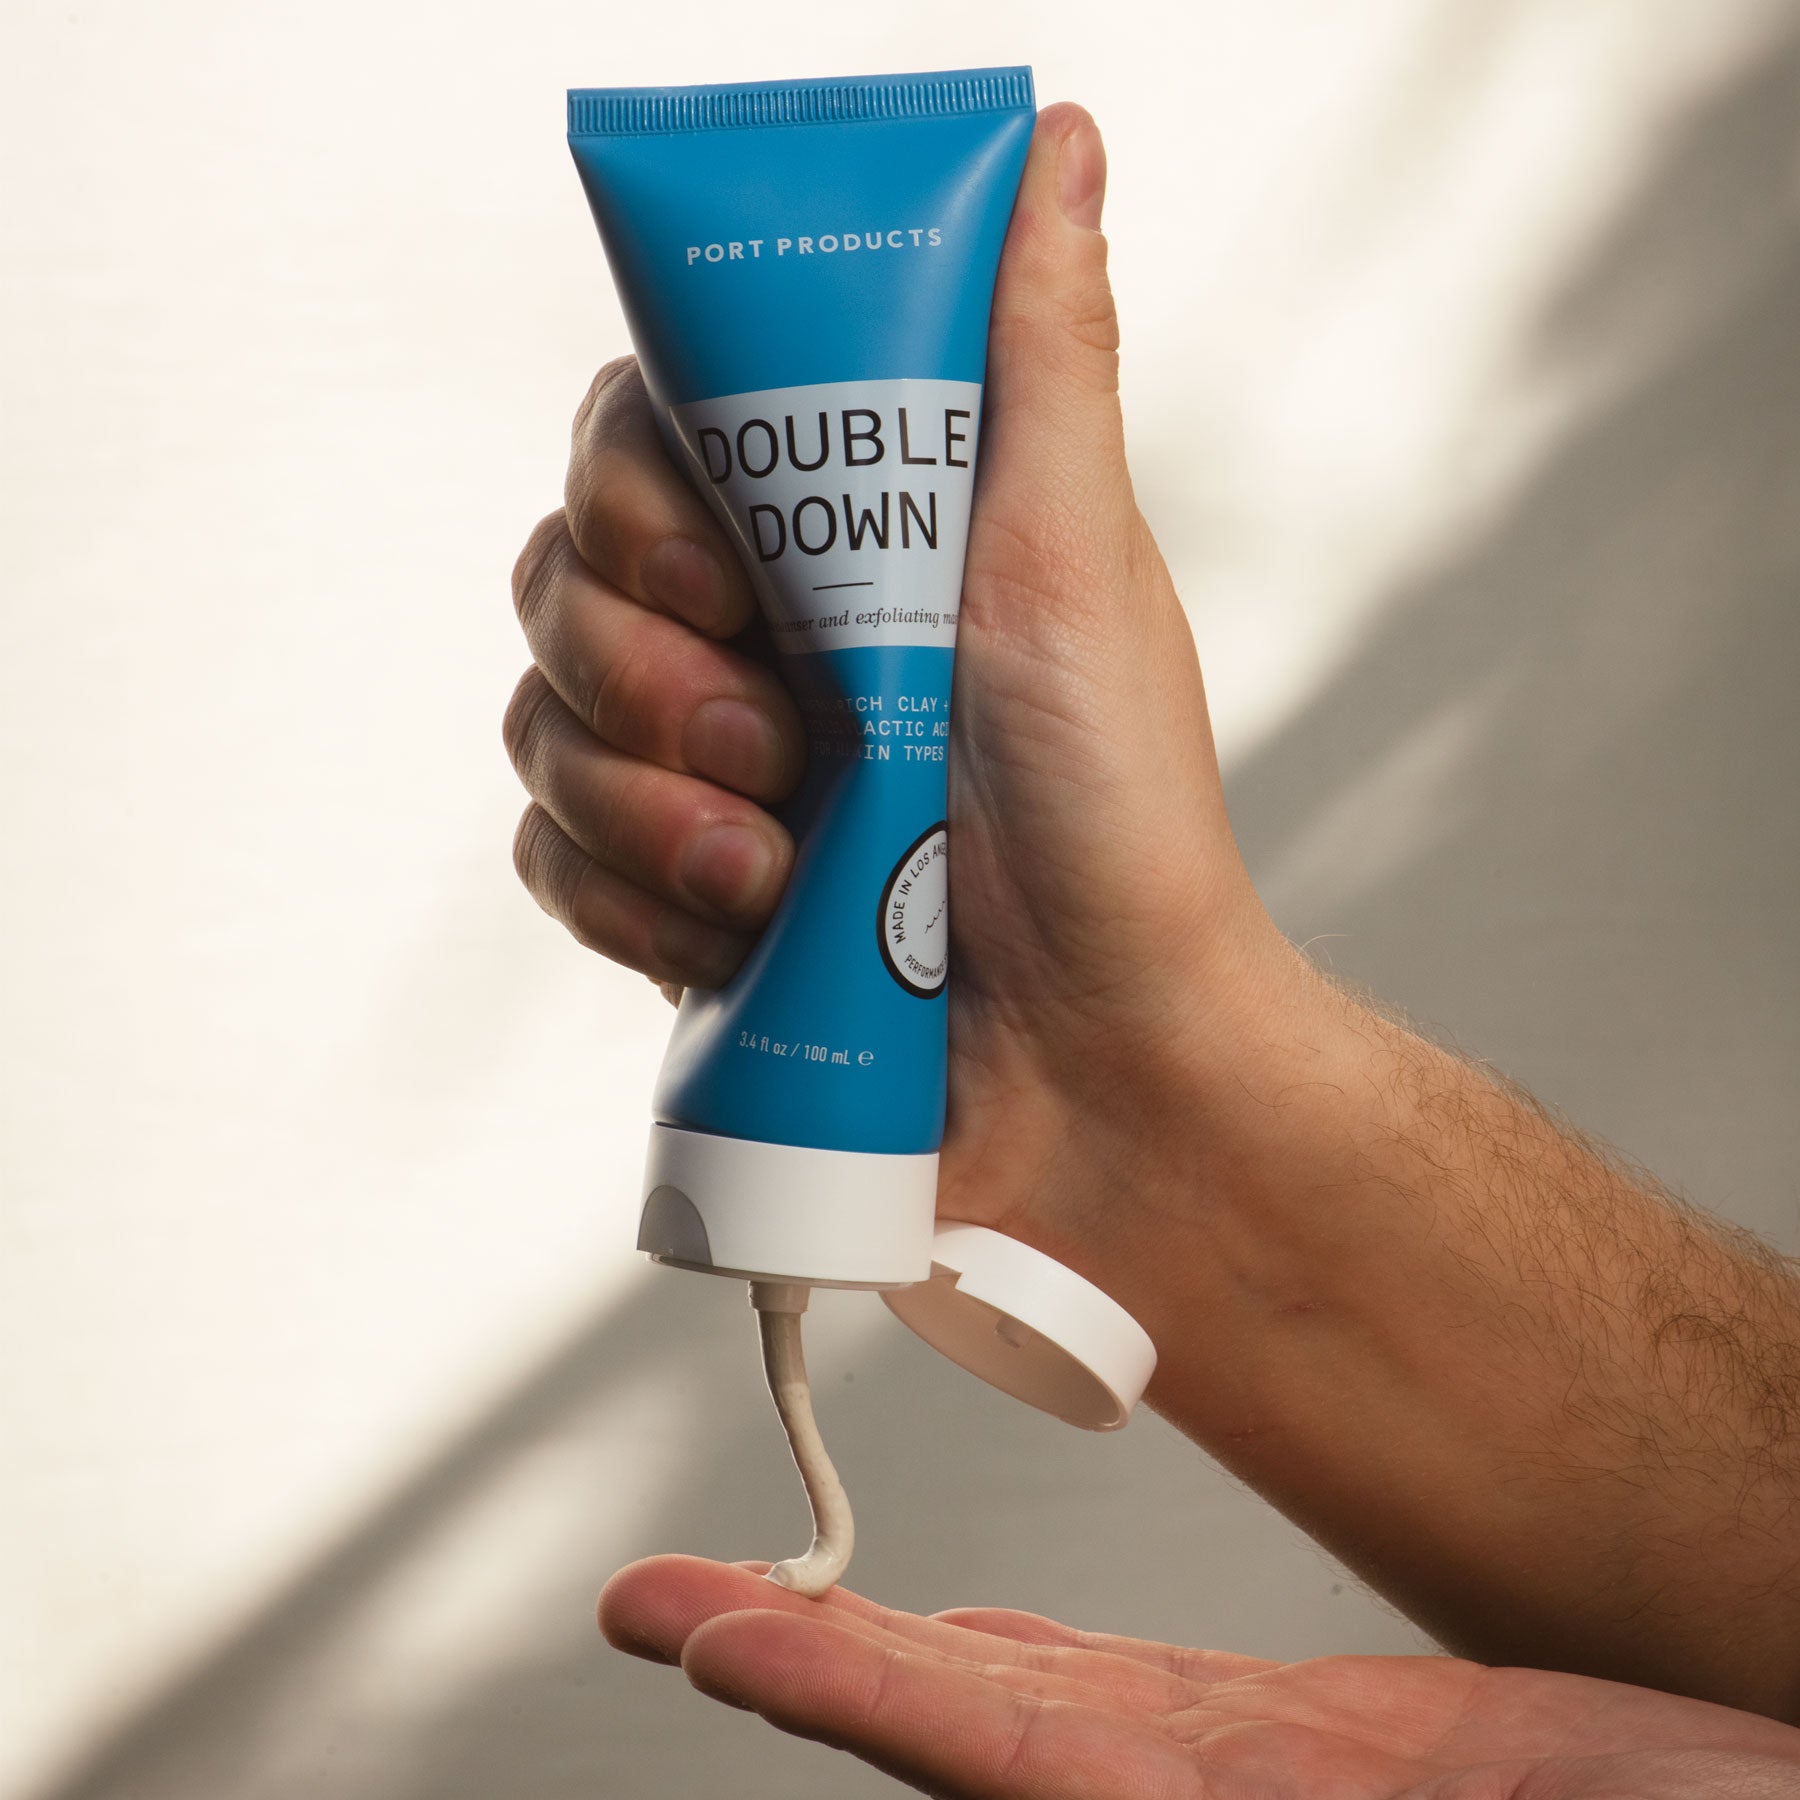 Double Down Face Cleanser and Exfoliating Mask blue tube in man's hand. One hand squeezing tube and gray cream into other hand